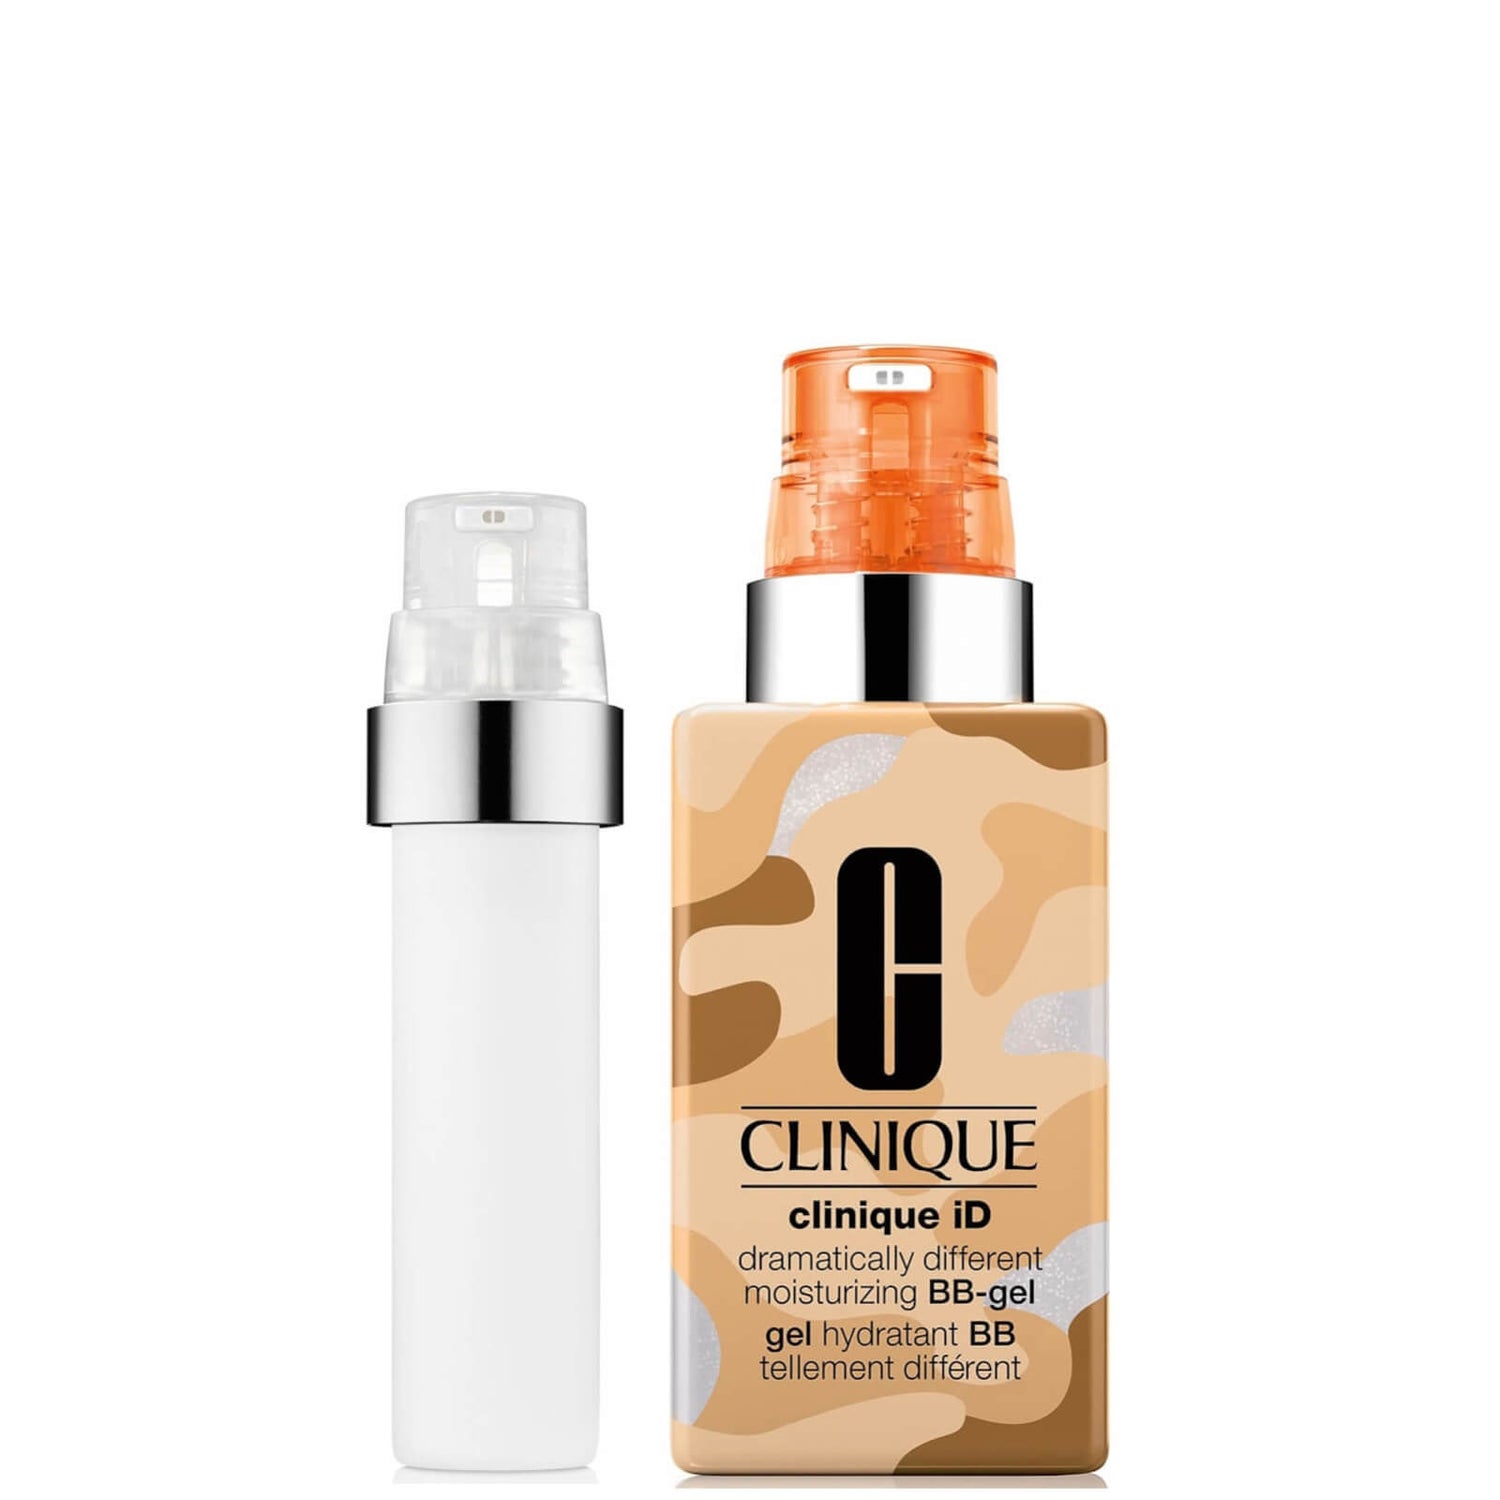 Clinique iD Dramatically Different Moisturising BB-Gel und Active Cartridge Concentrate for Uneven Skin Tone Bundle